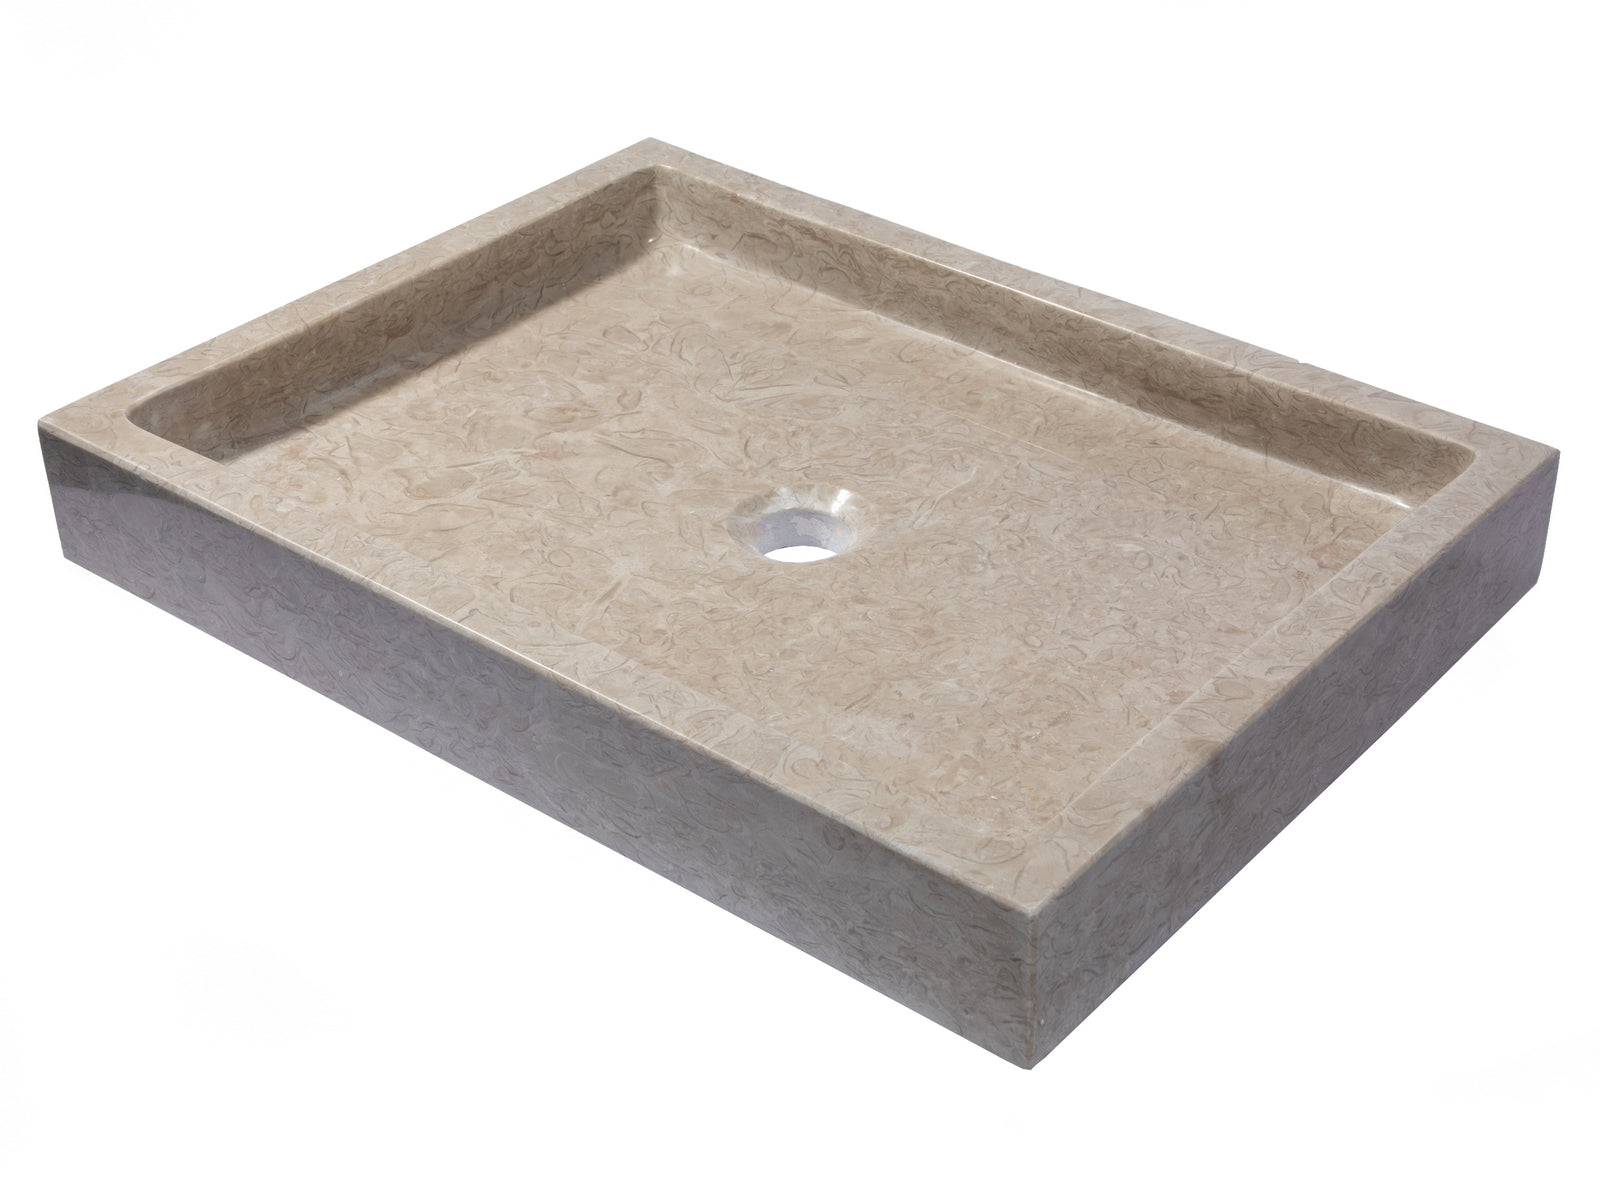 Rectangular Vessel Sink in Polished Penny Grey Marble